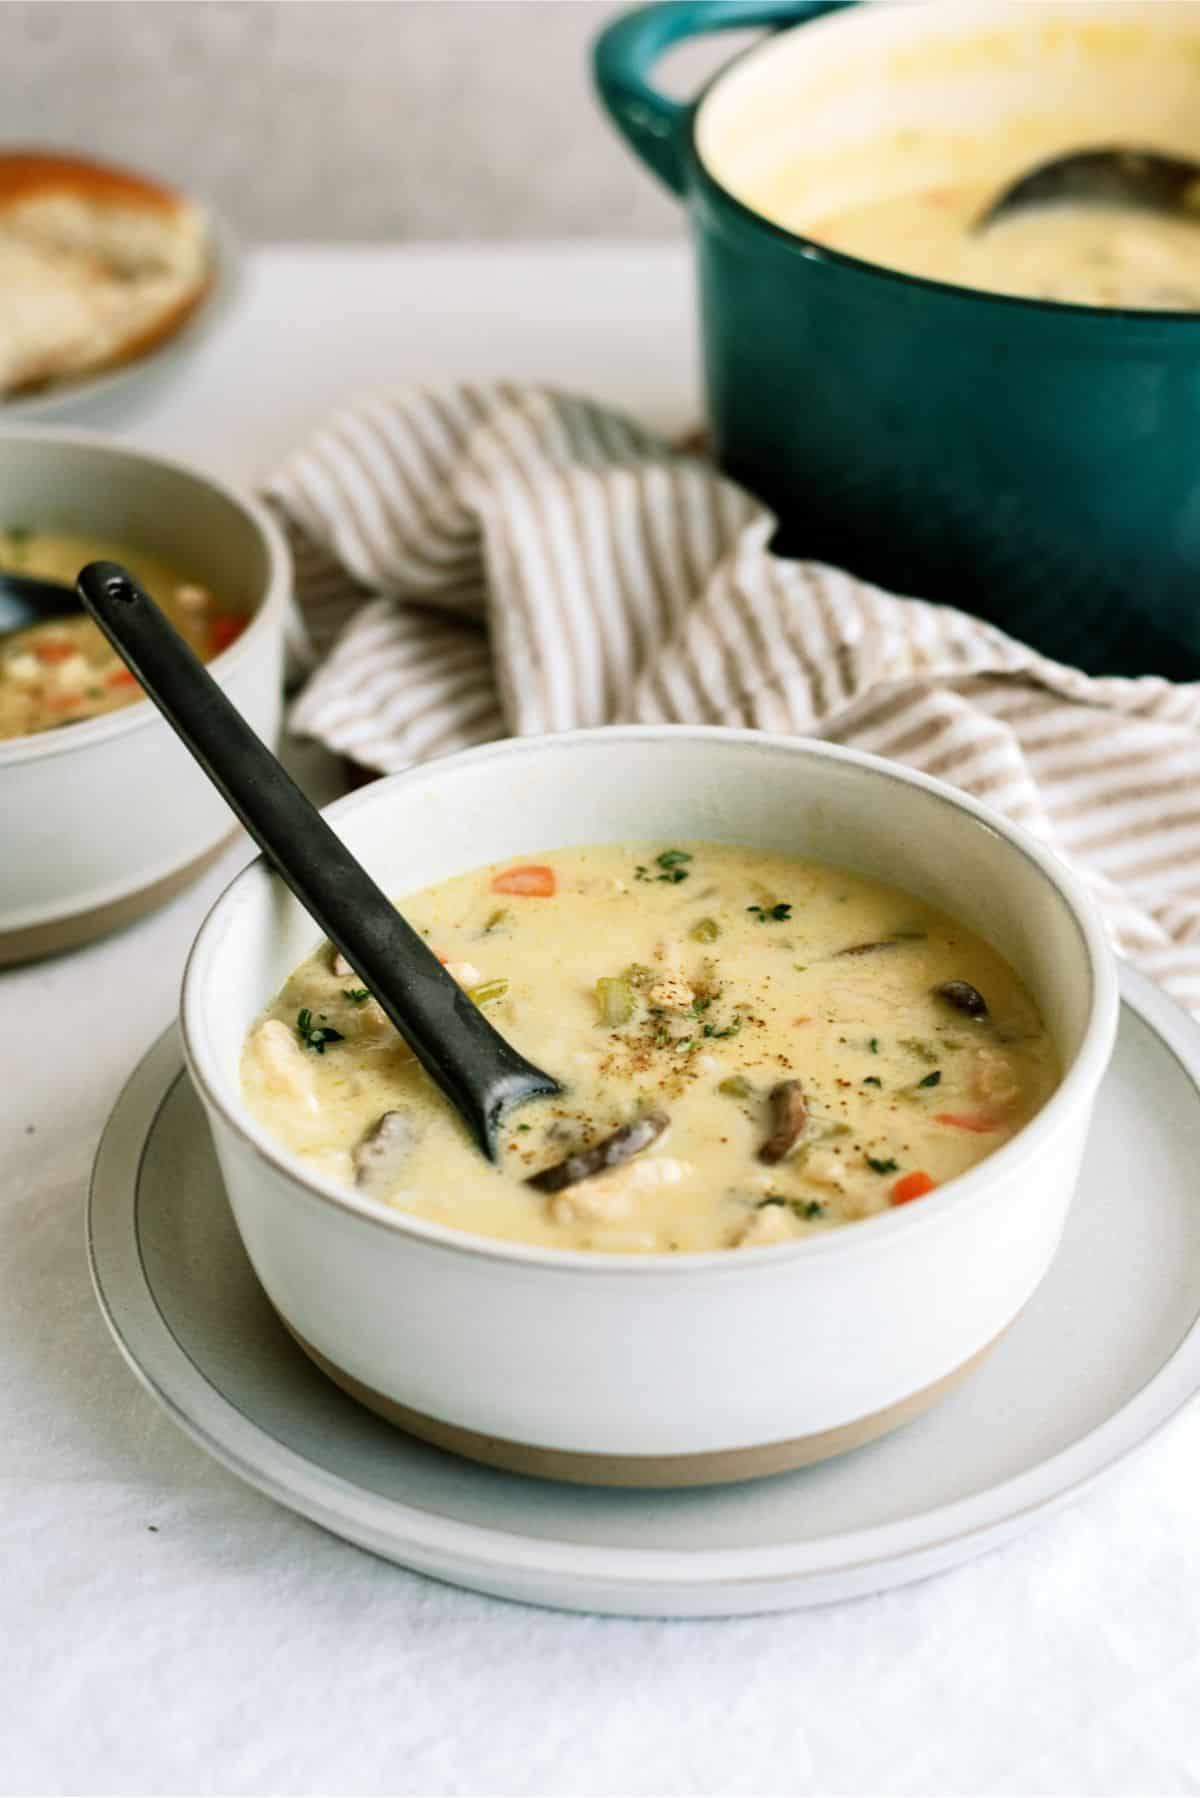 https://www.sixsistersstuff.com/wp-content/uploads/2022/01/Creamy-Chicken-and-Wild-Rice-Soup-Recipe-1.jpg